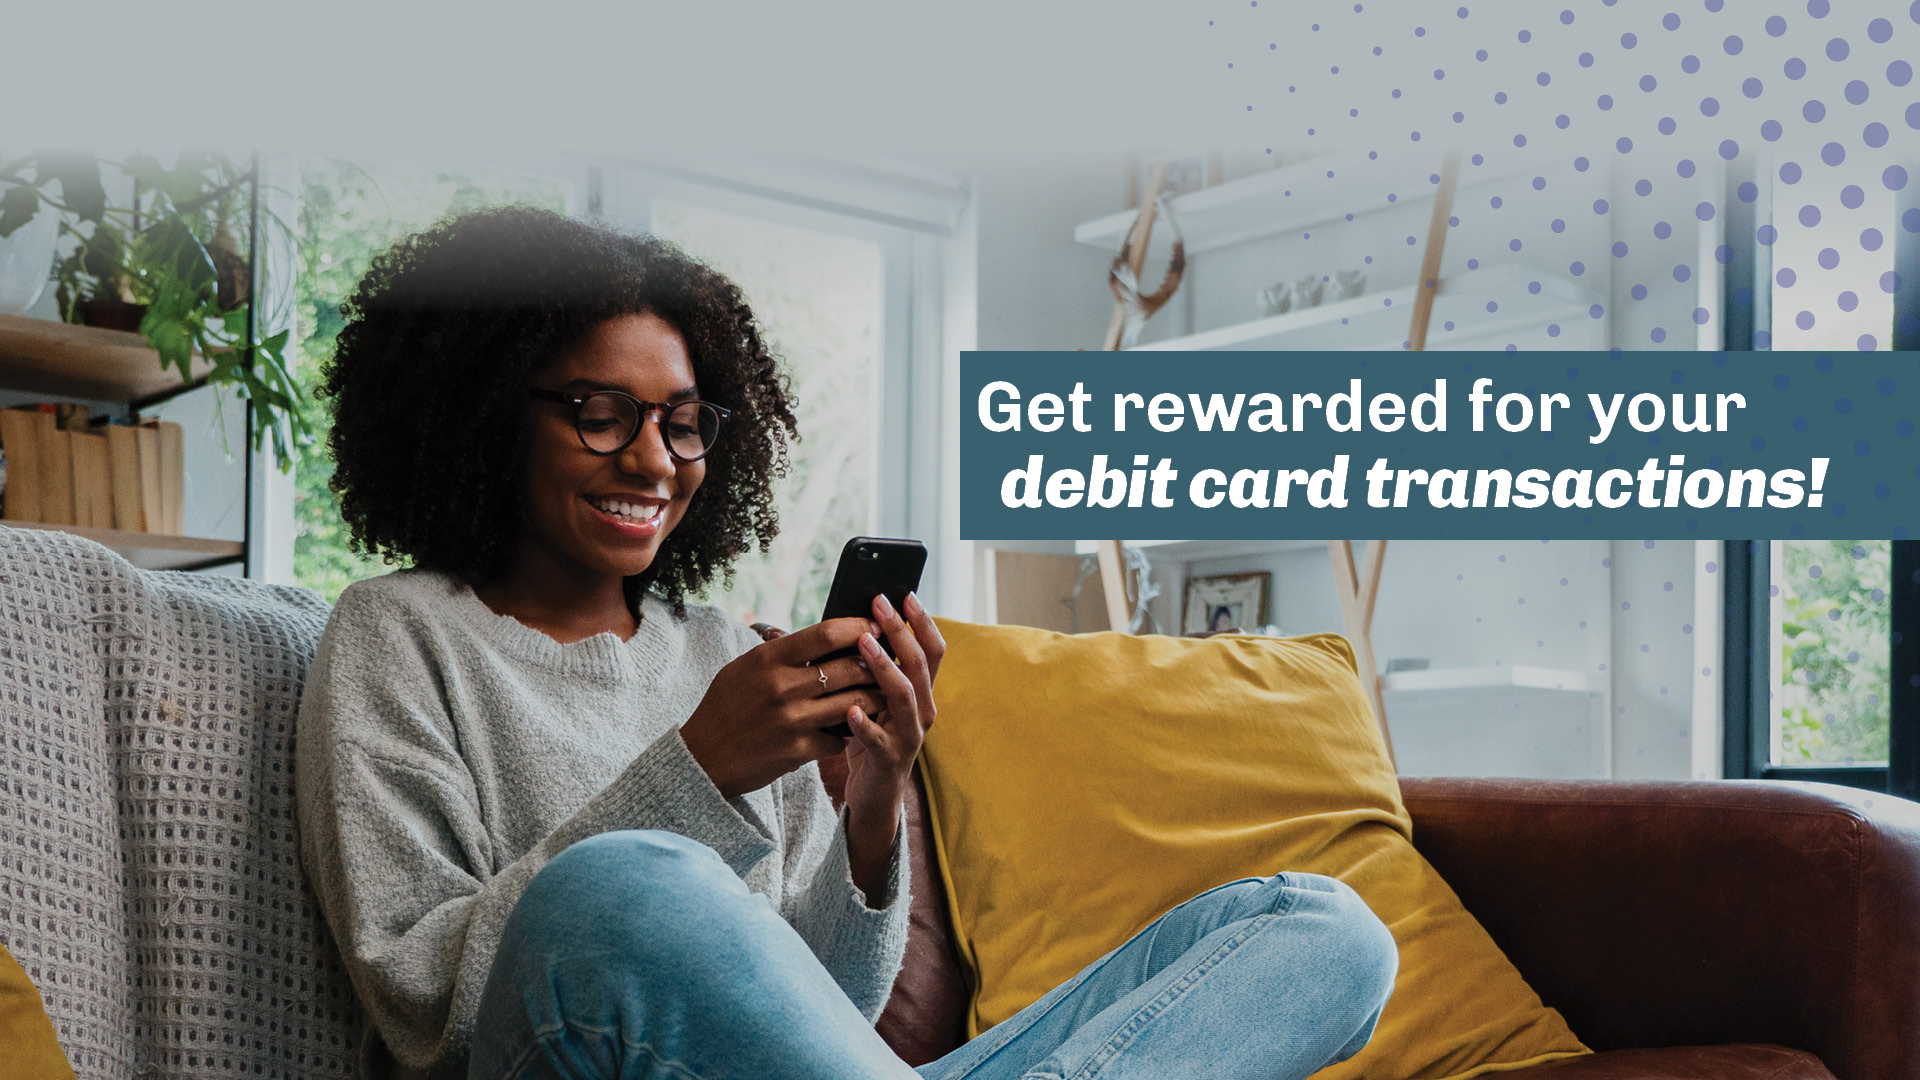 Get rewarded for debit card transactions. Woman sitting on couch, looking at her phone